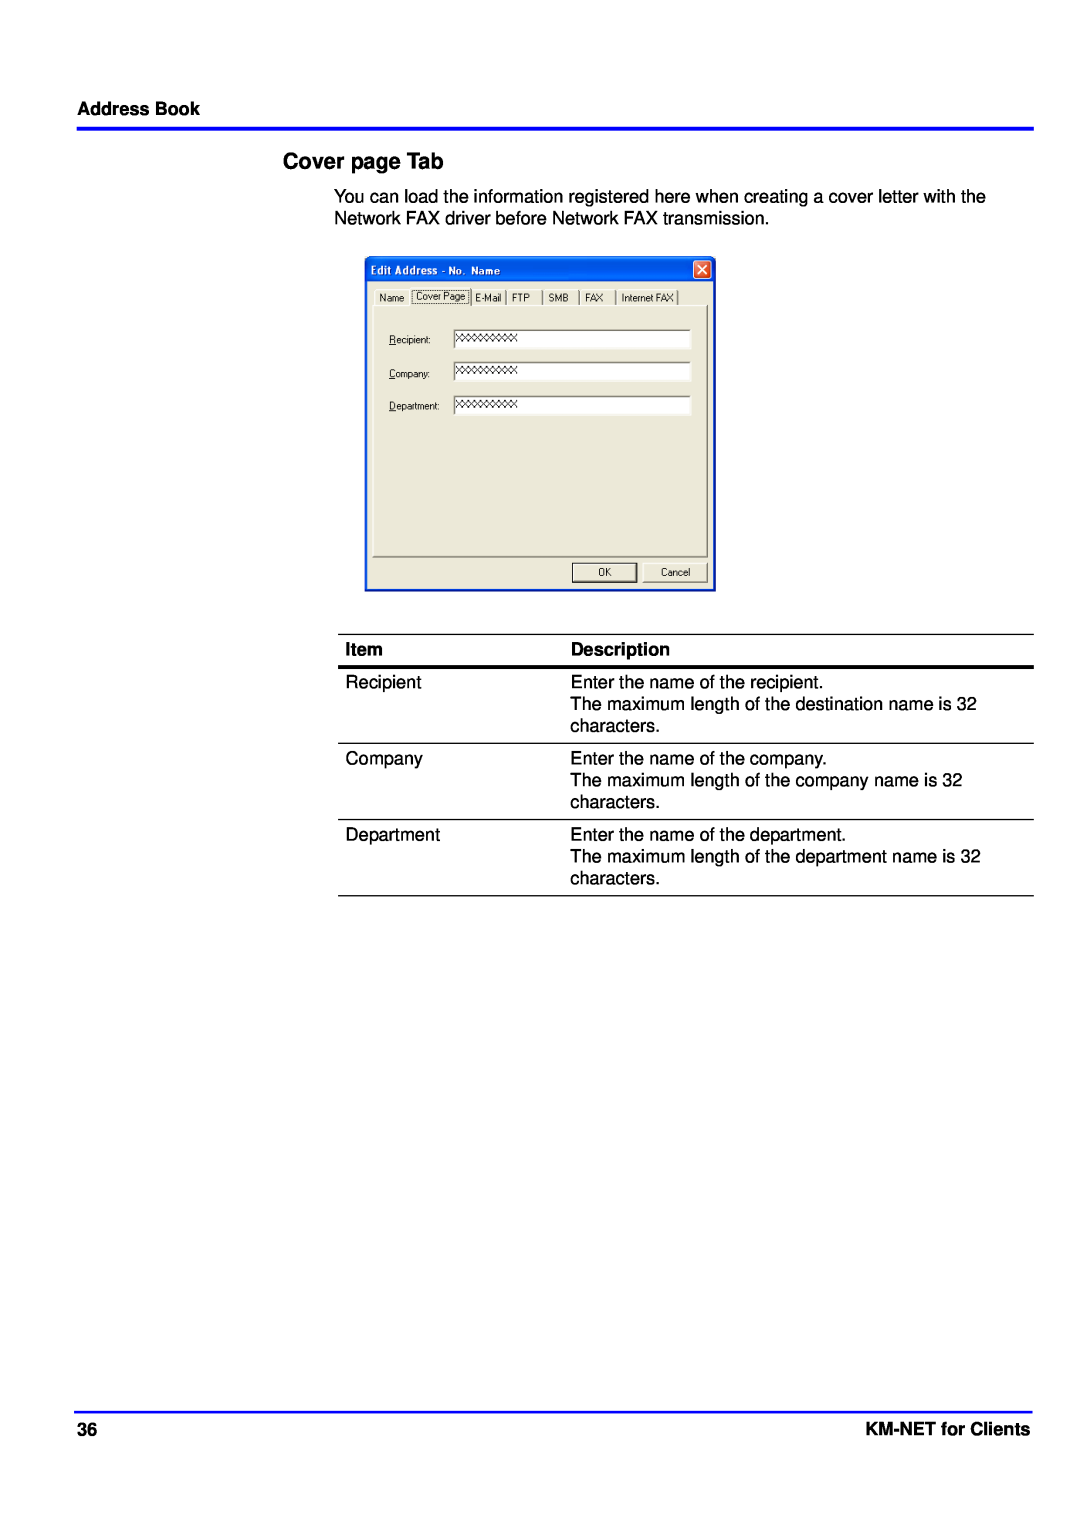 Kyocera manual Cover page Tab, Address Book, Item, Description, KM-NETfor Clients 